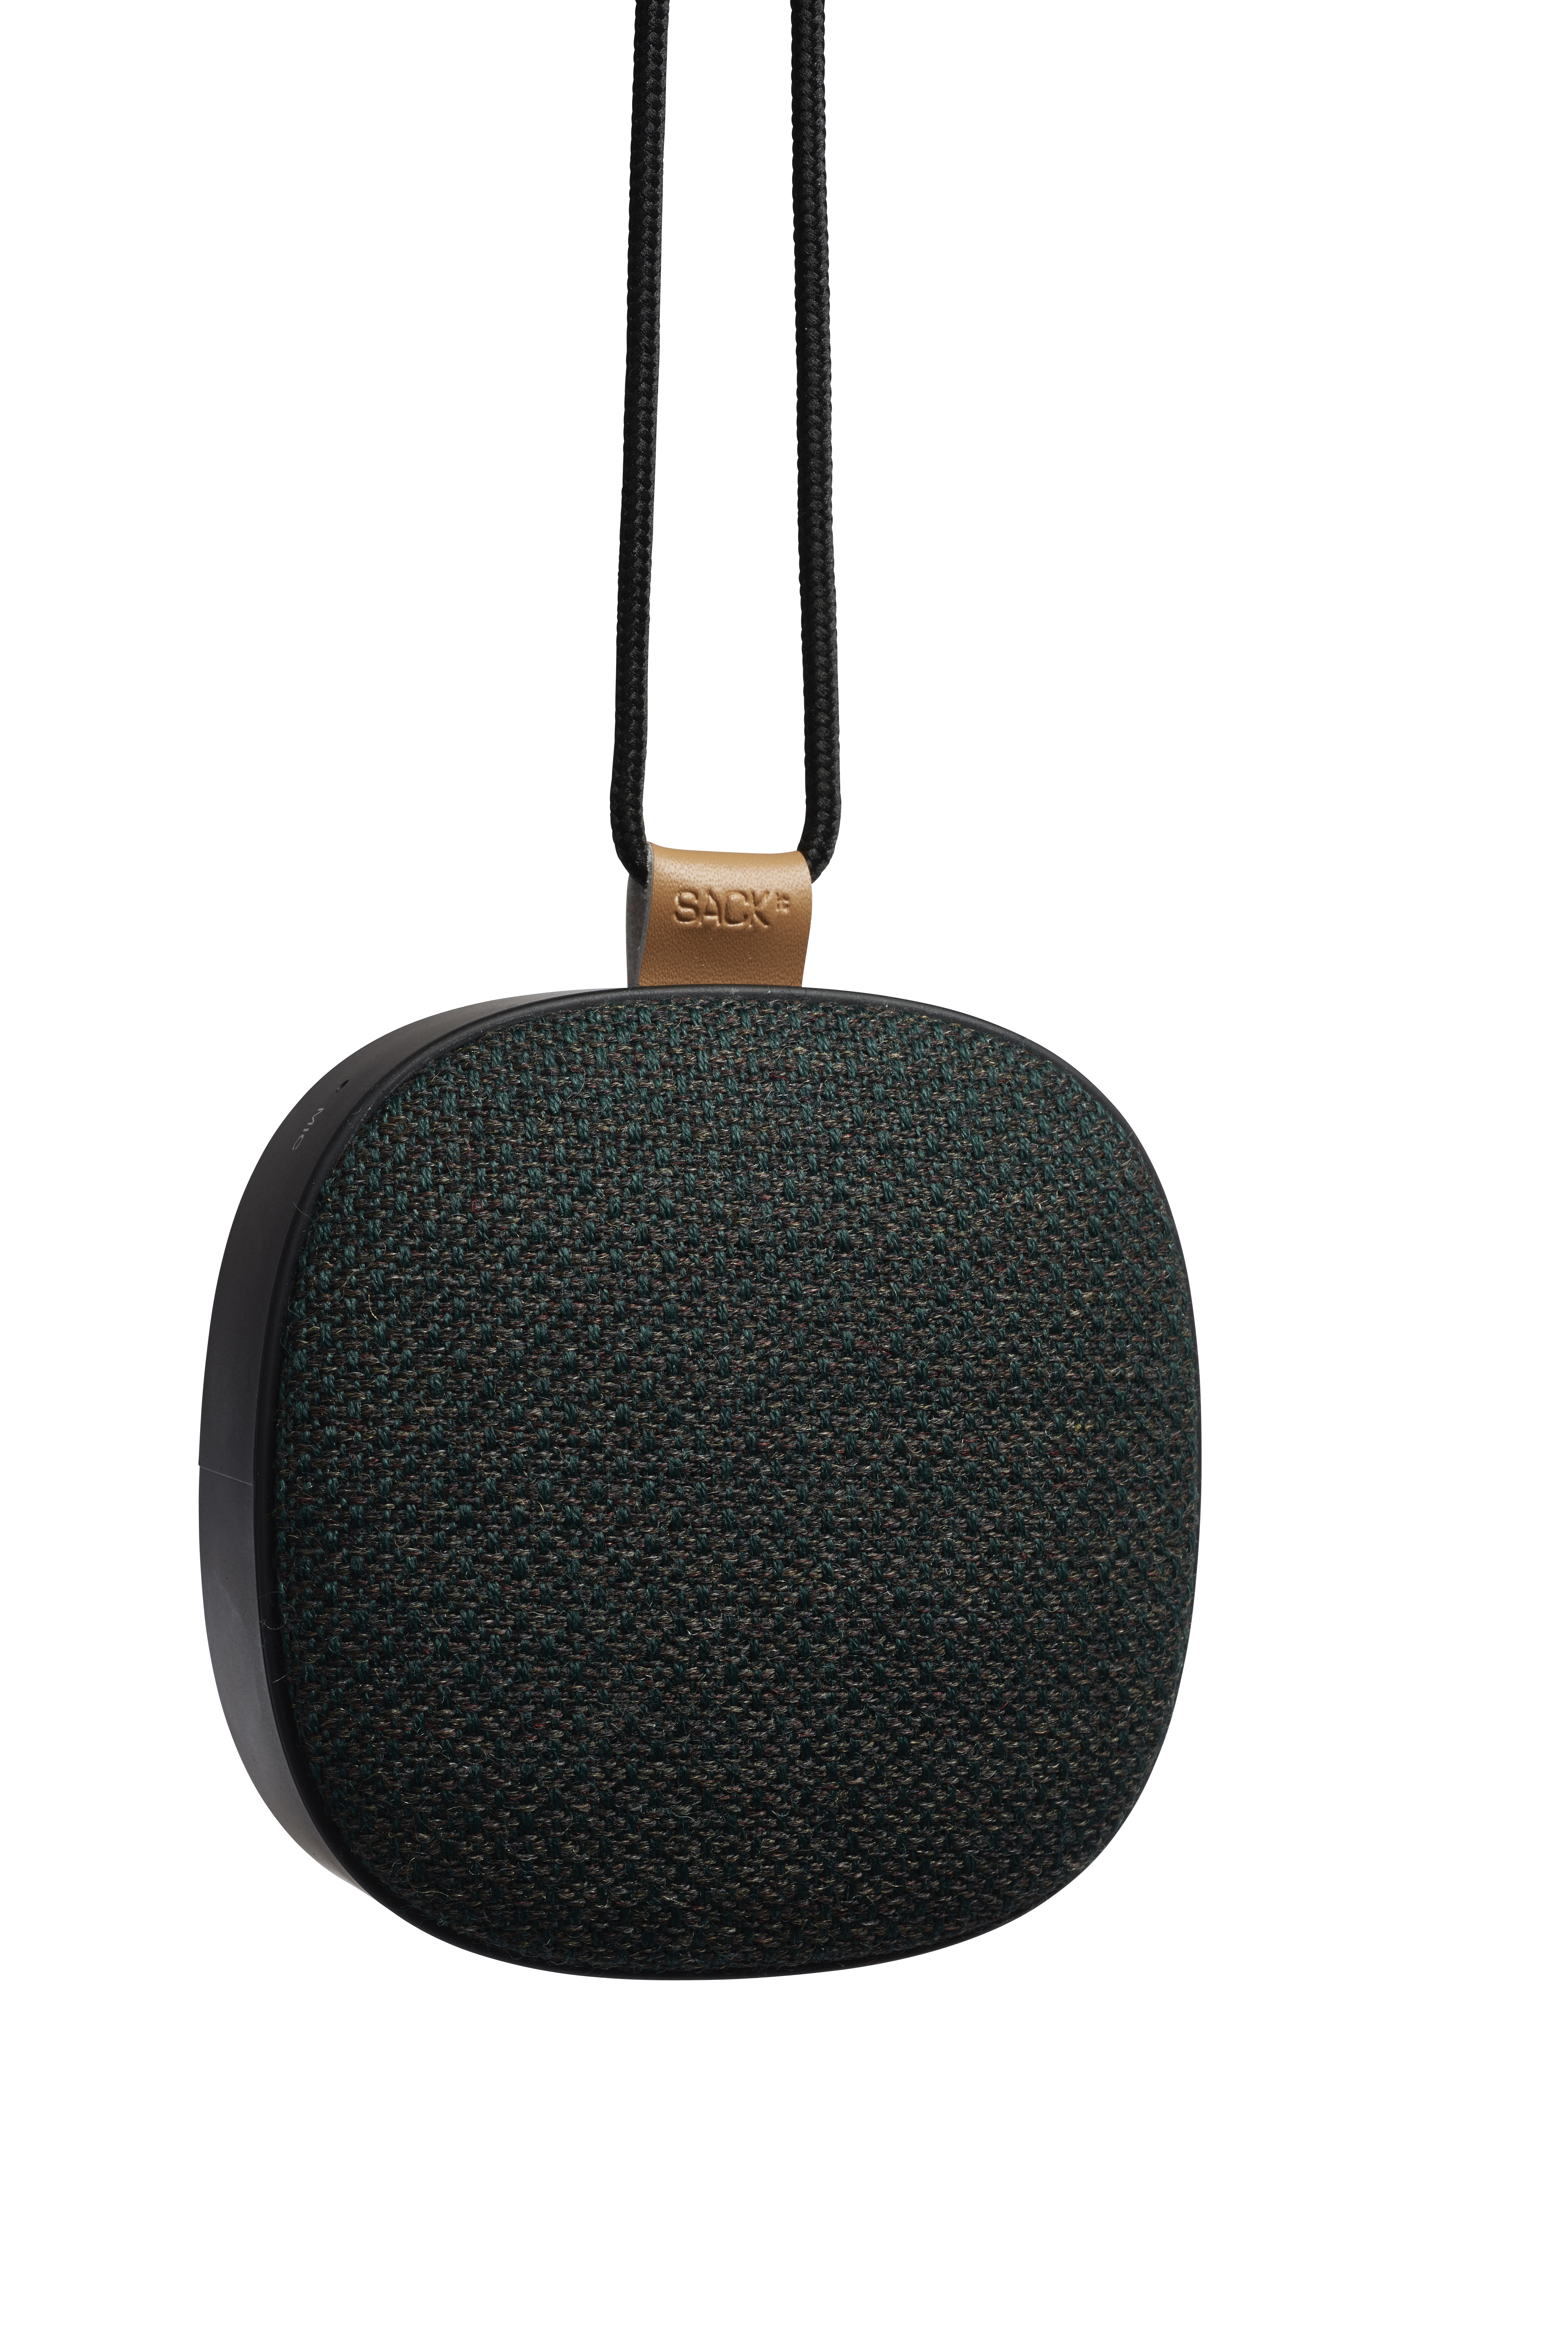 ​ Sackit WOOFit Go X Bluetooth speaker Forest